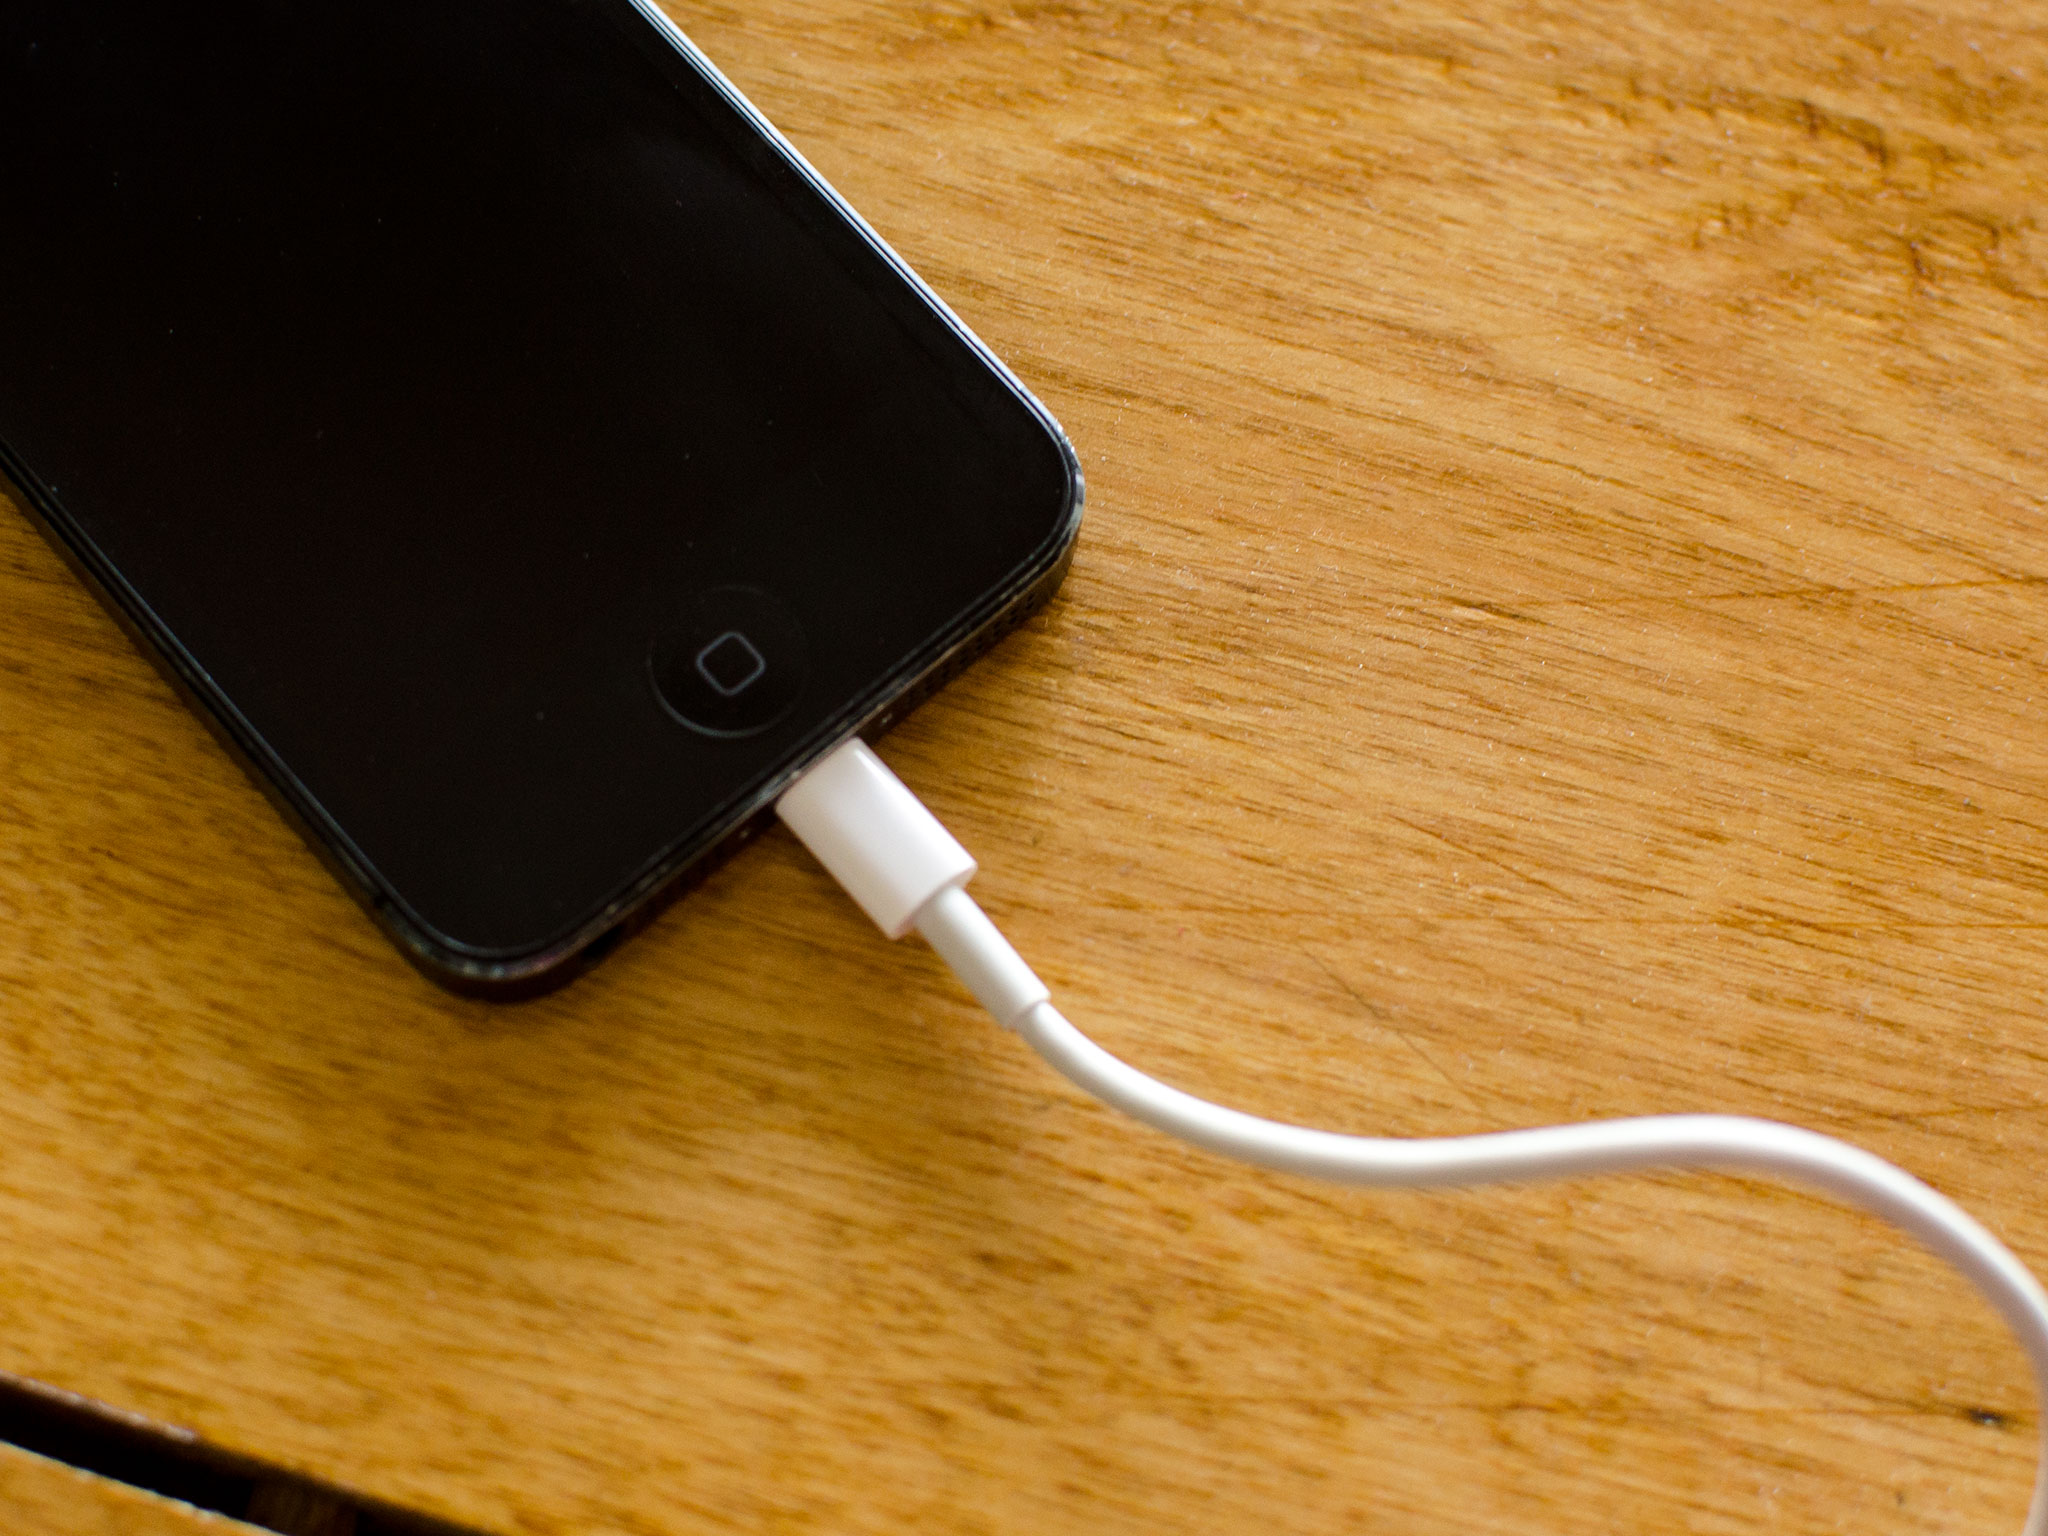 How to fix a broken charge port on an iPhone 5